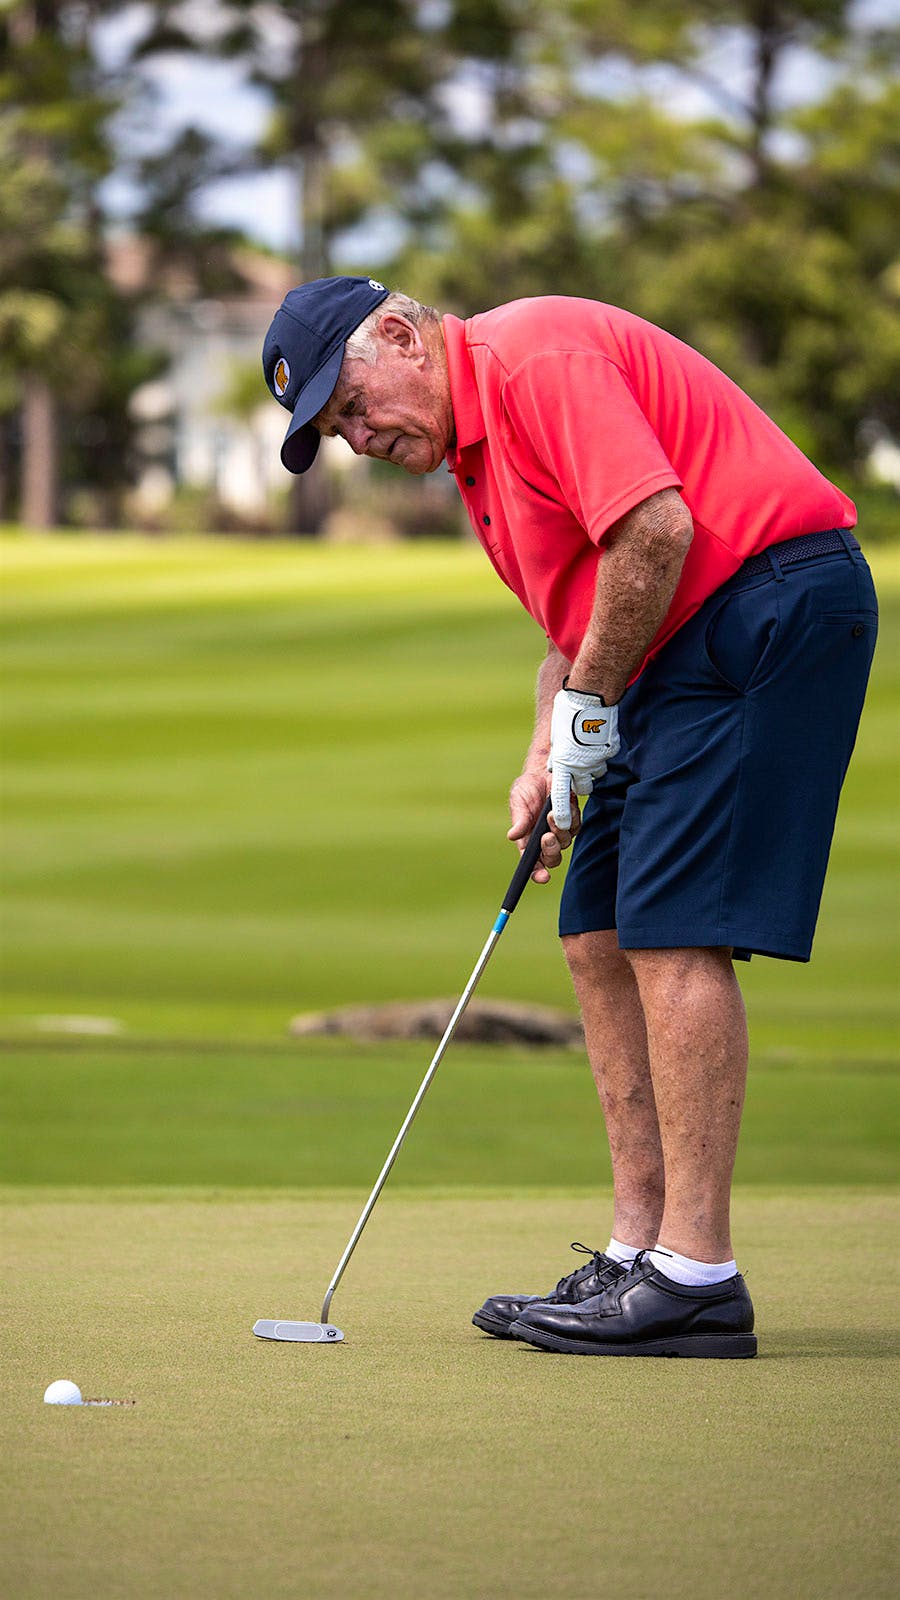 Golfing legend Jack Nicklaus, who has won 18 majors, sinking a putt at the Els for Autism Pro-Am.